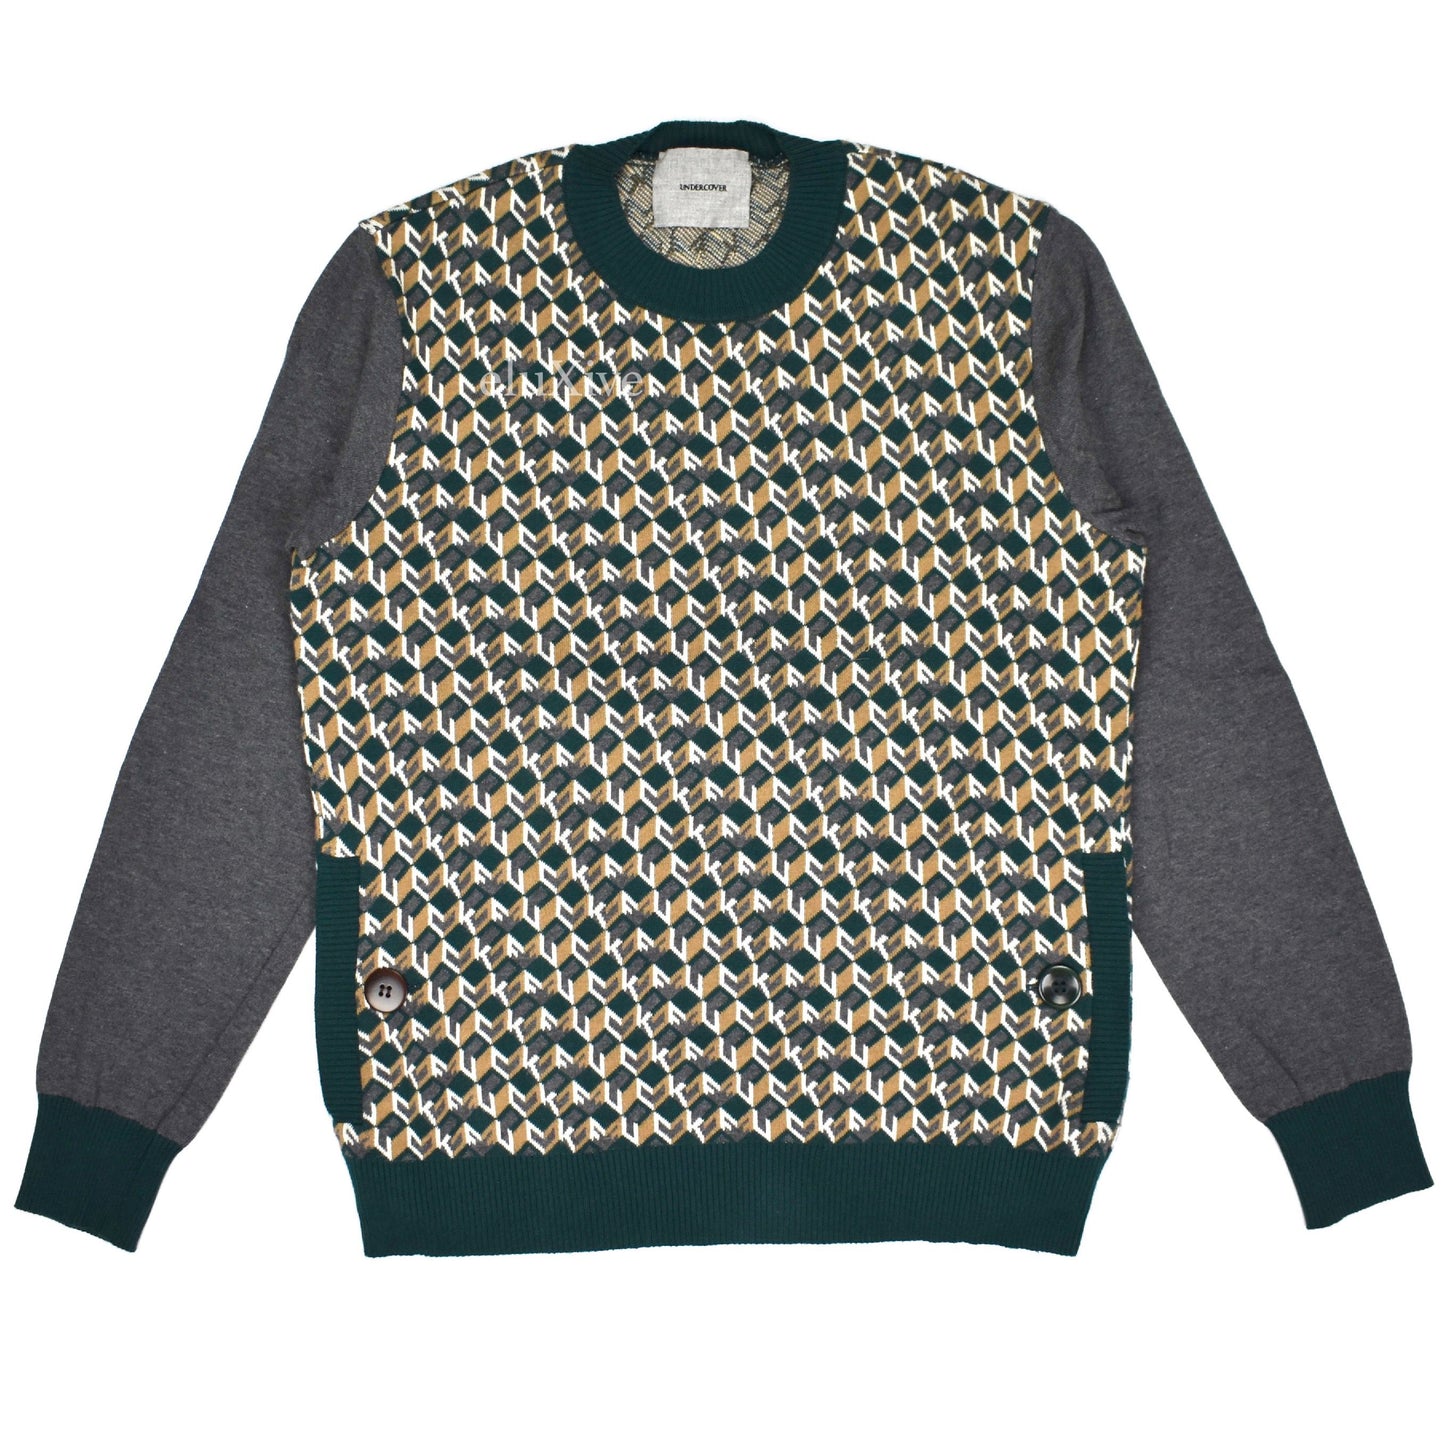 Undercover - 2012 'FUCK' Jacquard Knit Sweater